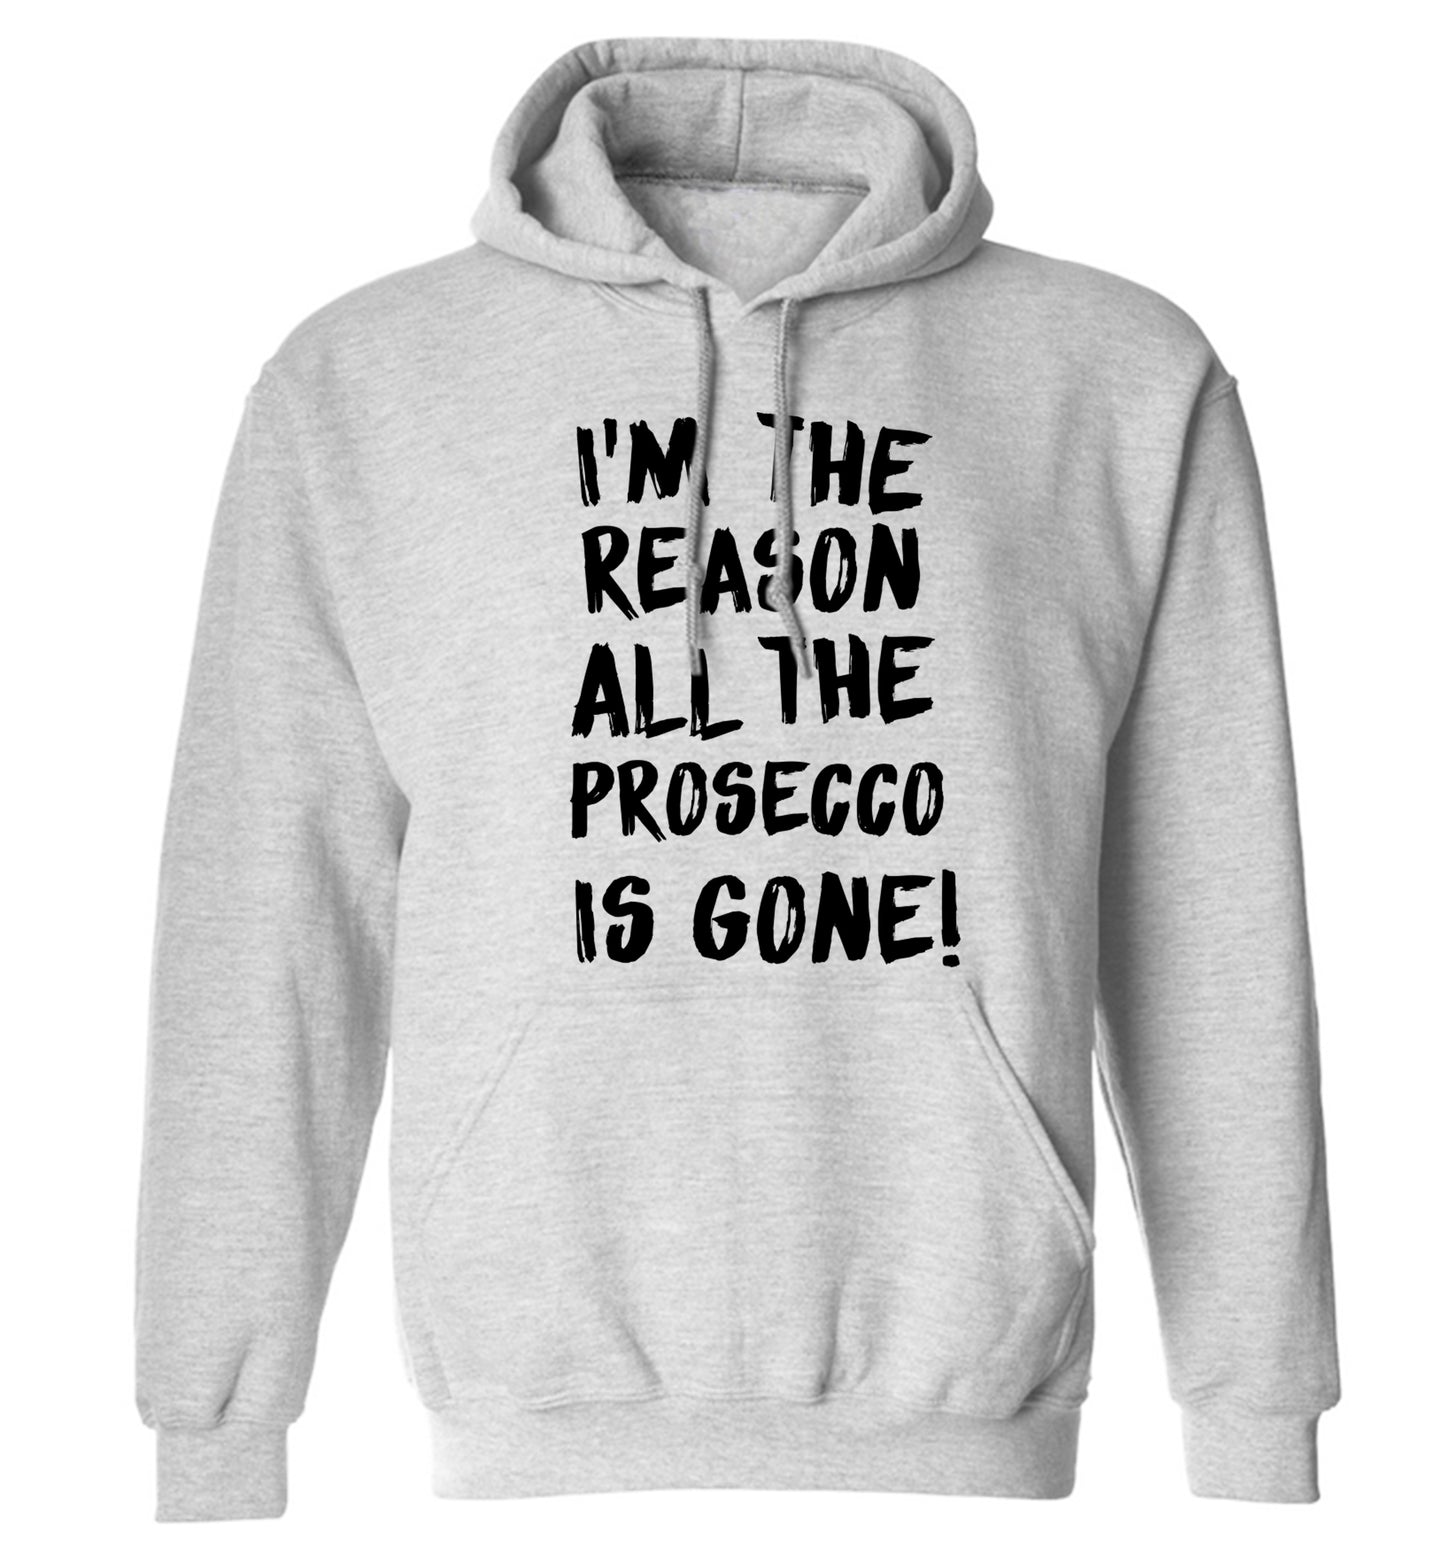 I'm the reason all the prosecco is gone adults unisex grey hoodie 2XL